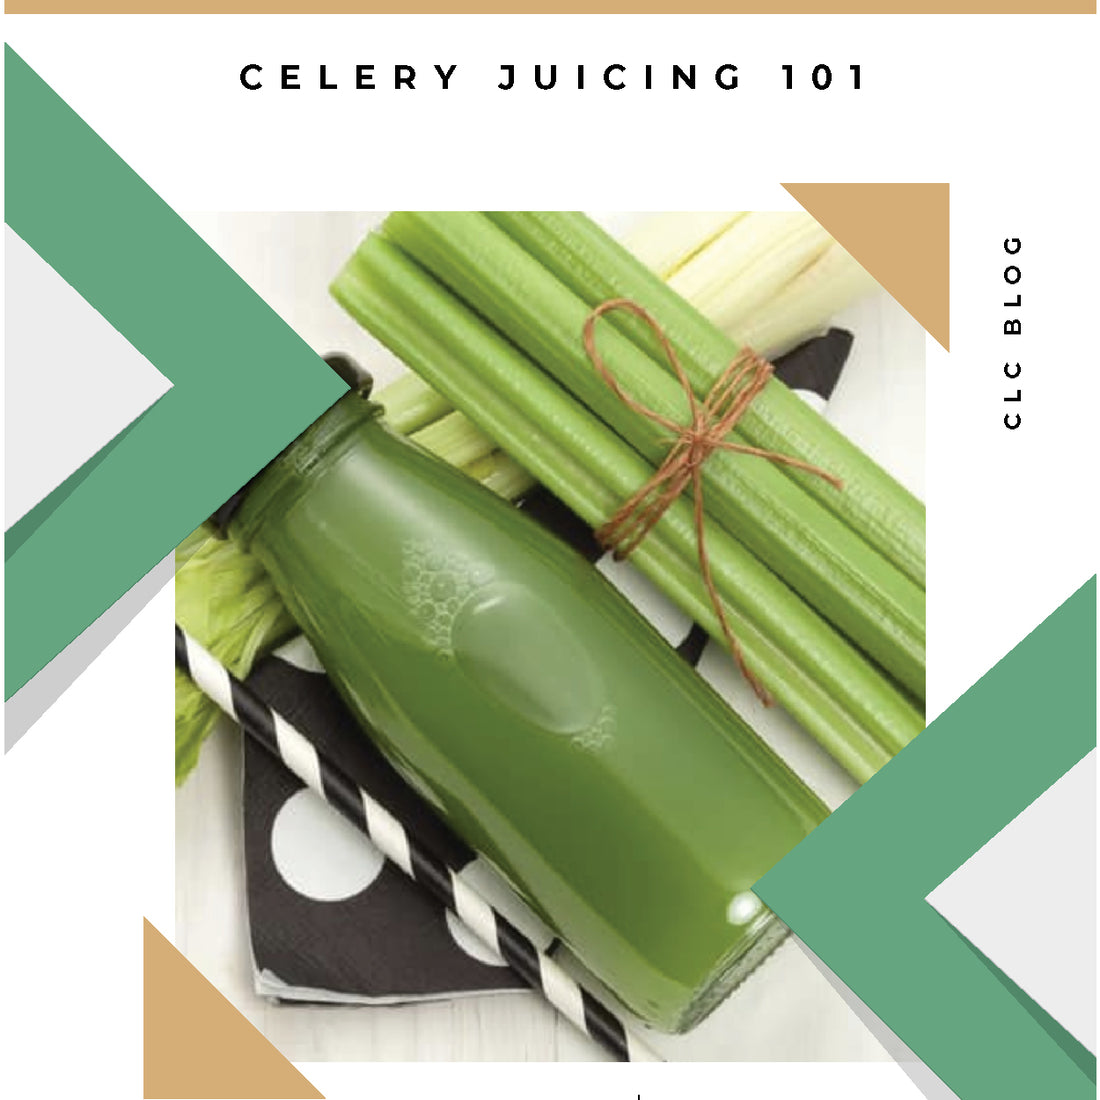 The Benefits of Celery Juice - the Cleanser, Healer and Aphrodisiac!